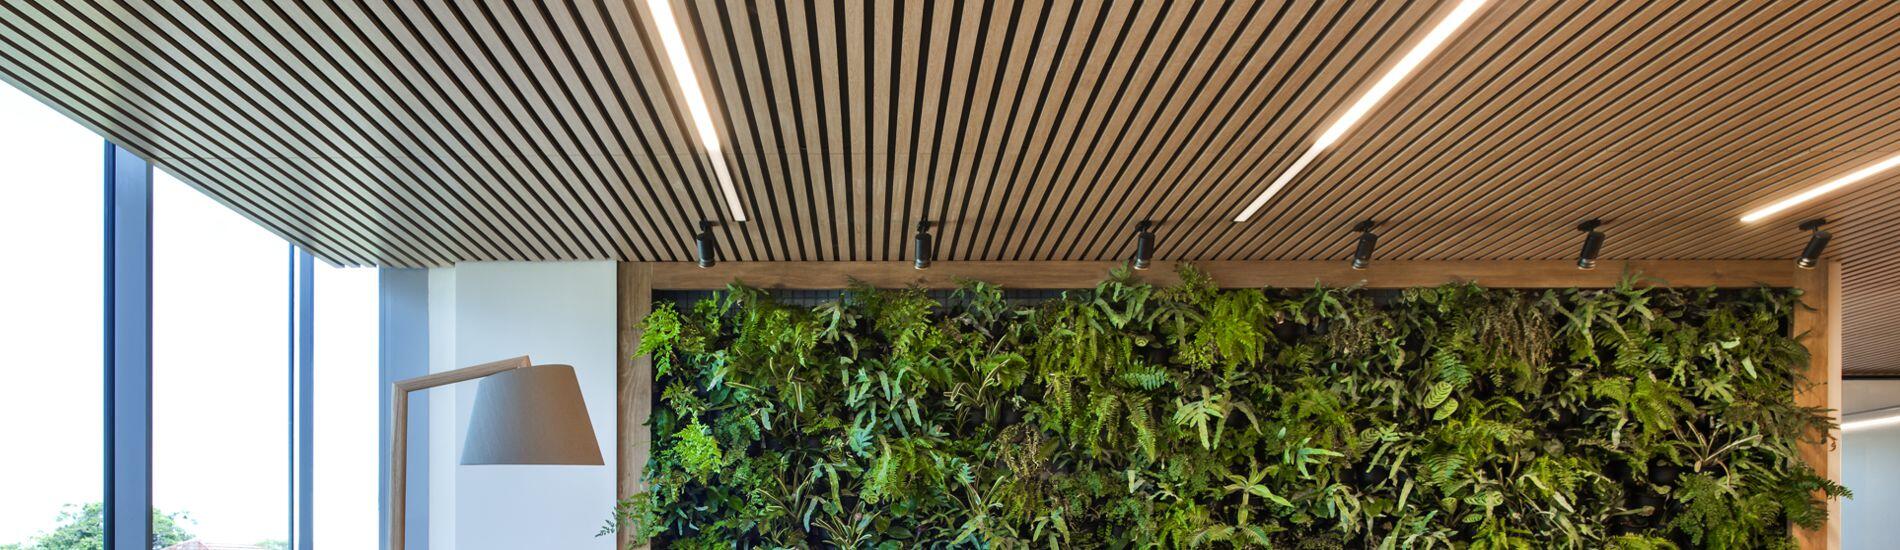 SUPASLAT Slatted Ceiling Panels Address Acoustics in Workplace Fitout